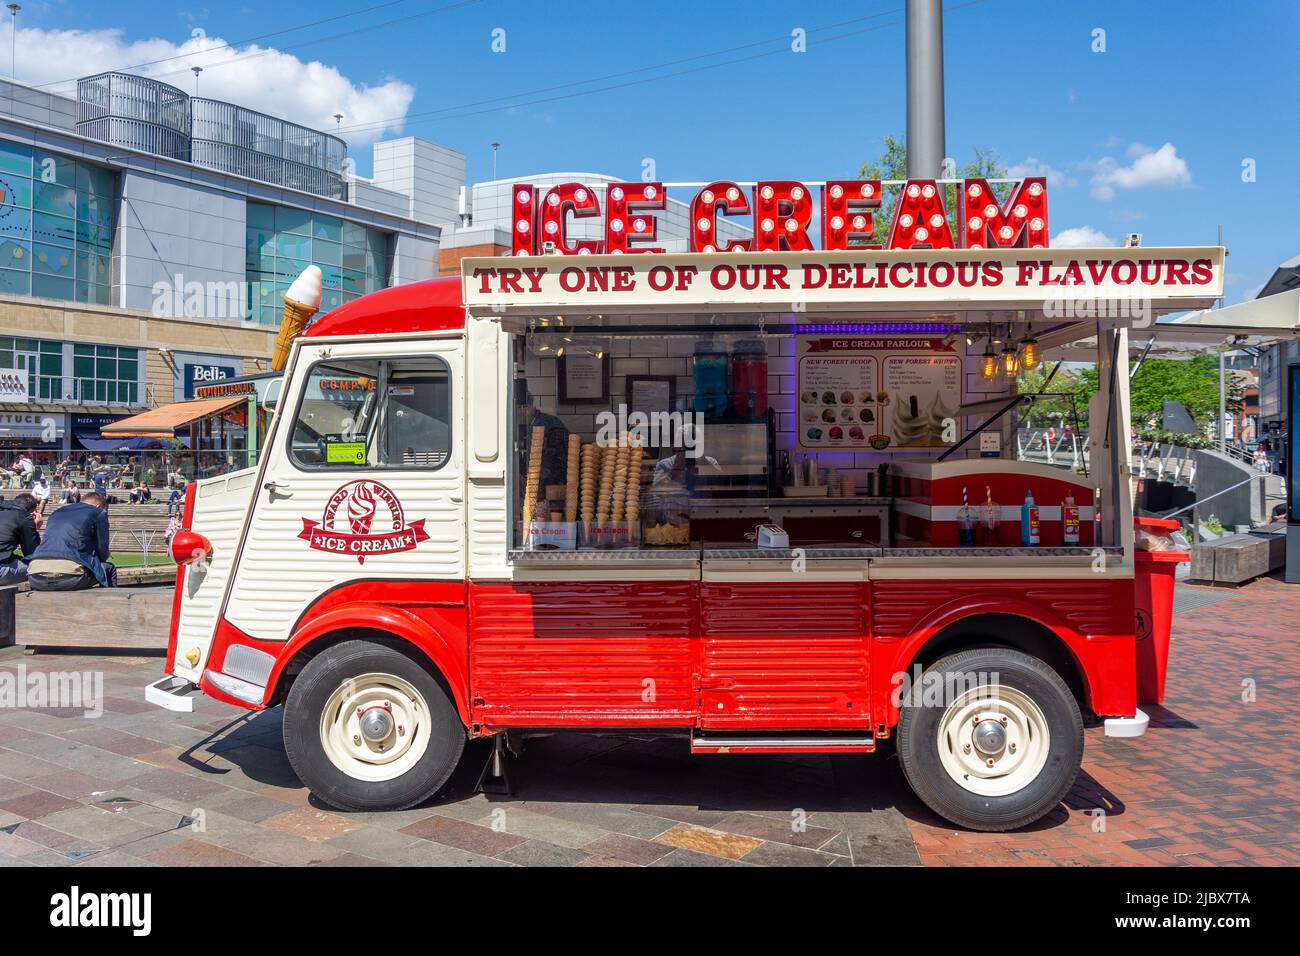 Ice cream van in The Oracle Riverside shopping centre, Reading, Berkshire, England, United Kingdom Stock Photo